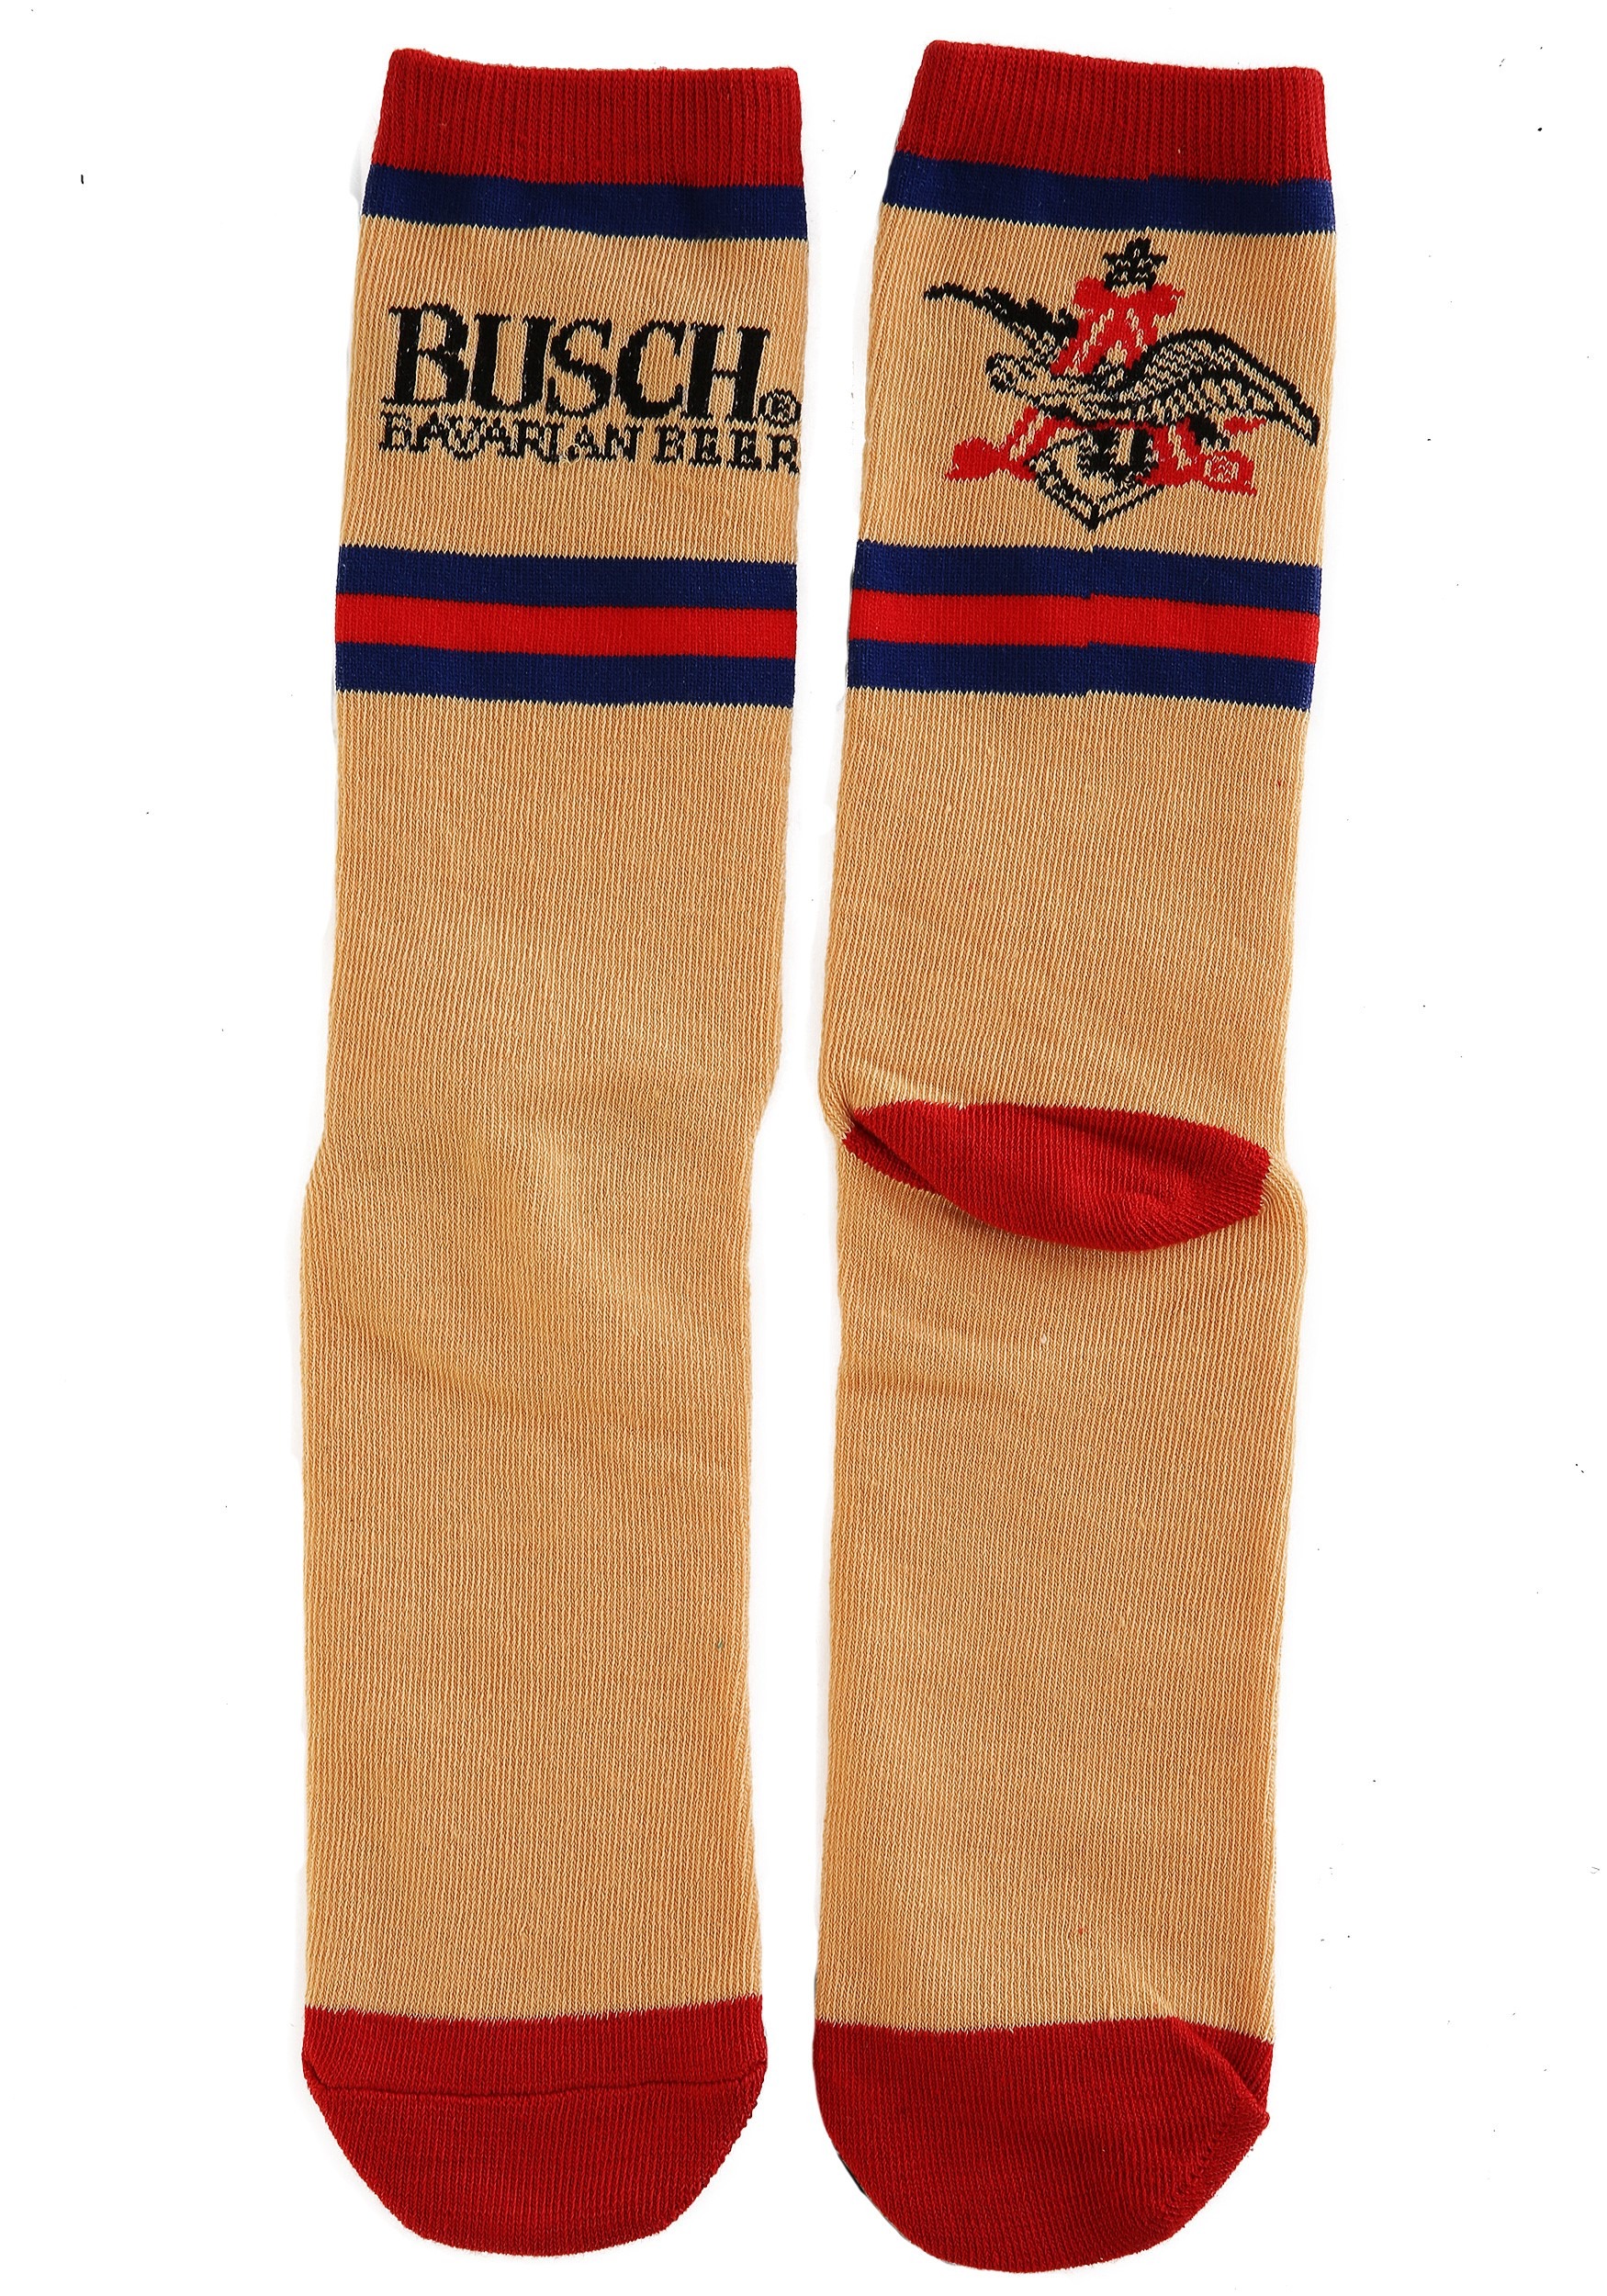 Anheuser Busch Beer Knit Crew Socks for Adults